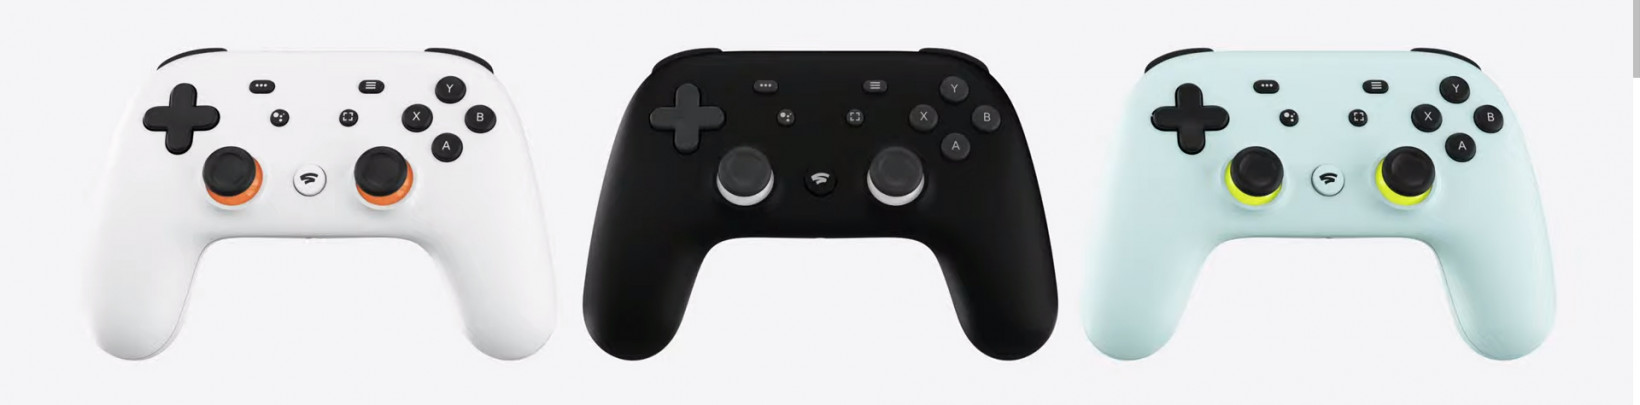 The Stadia Play controller looks unremarkable, but it has a neat feature: it connects via Wi-Fi directly to Google's data center to reduce input lag